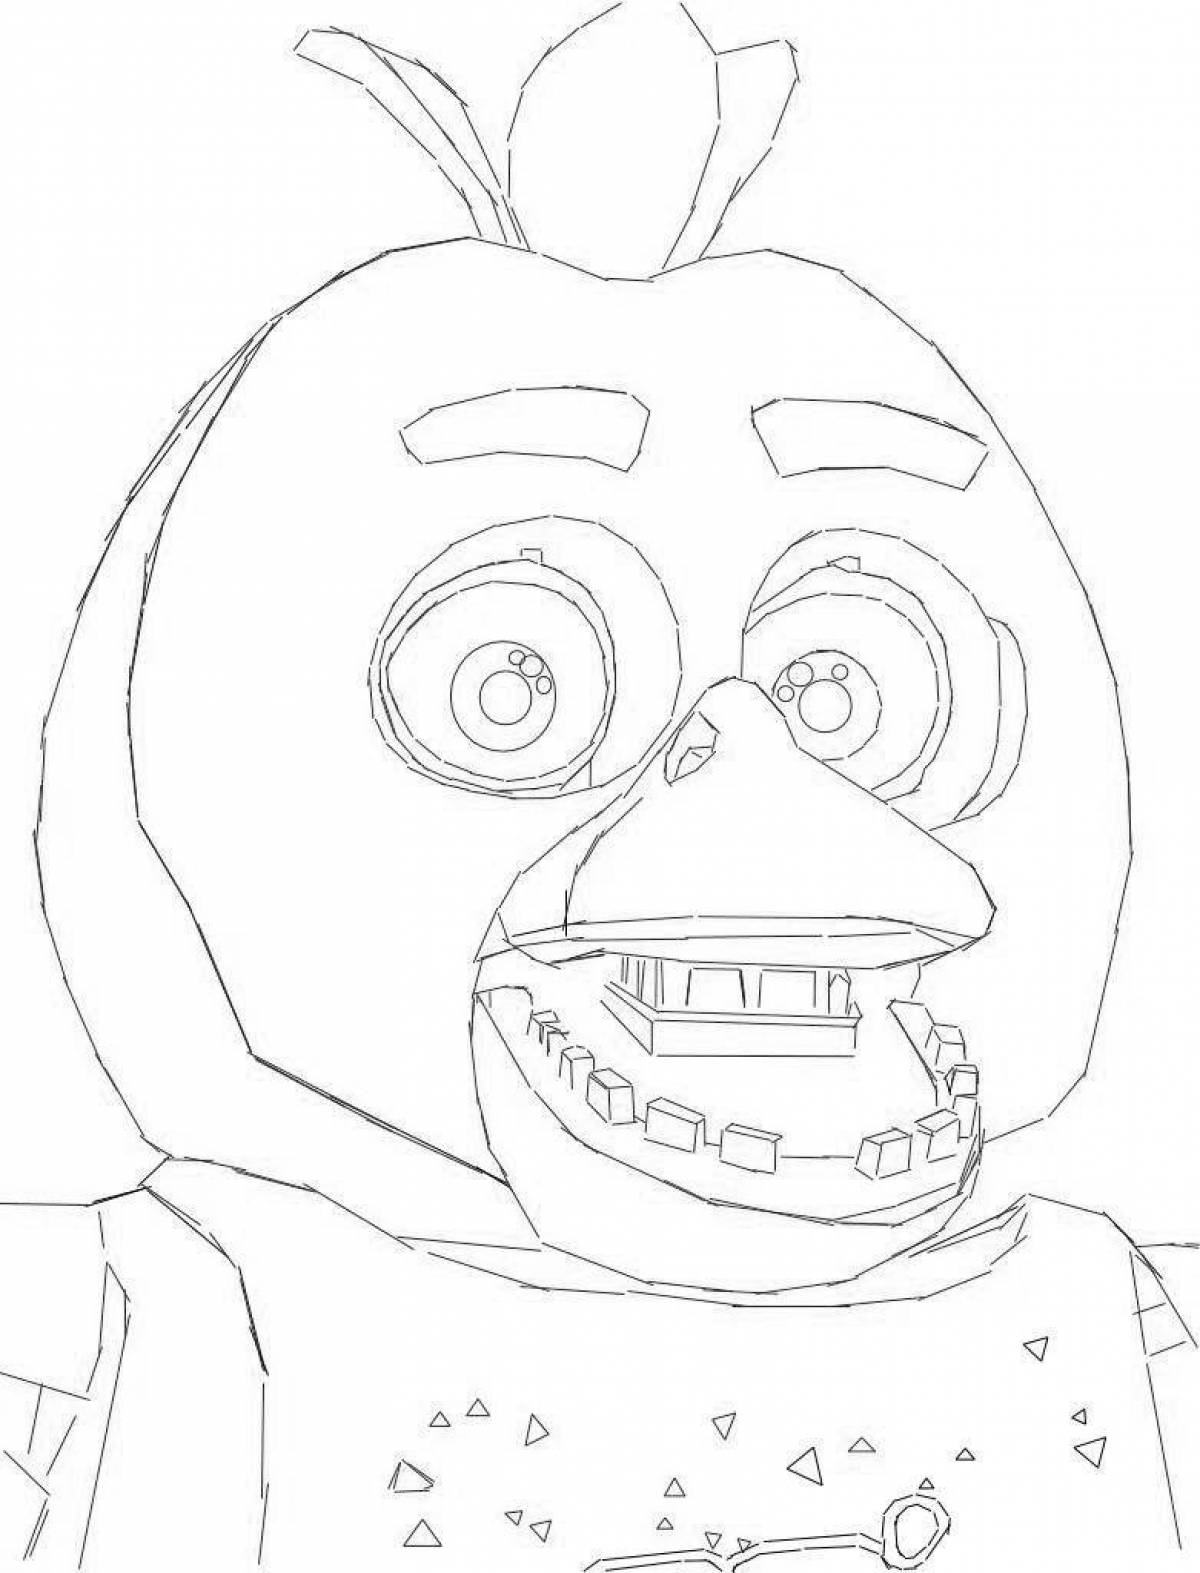 Live chica fnaf 9 coloring book